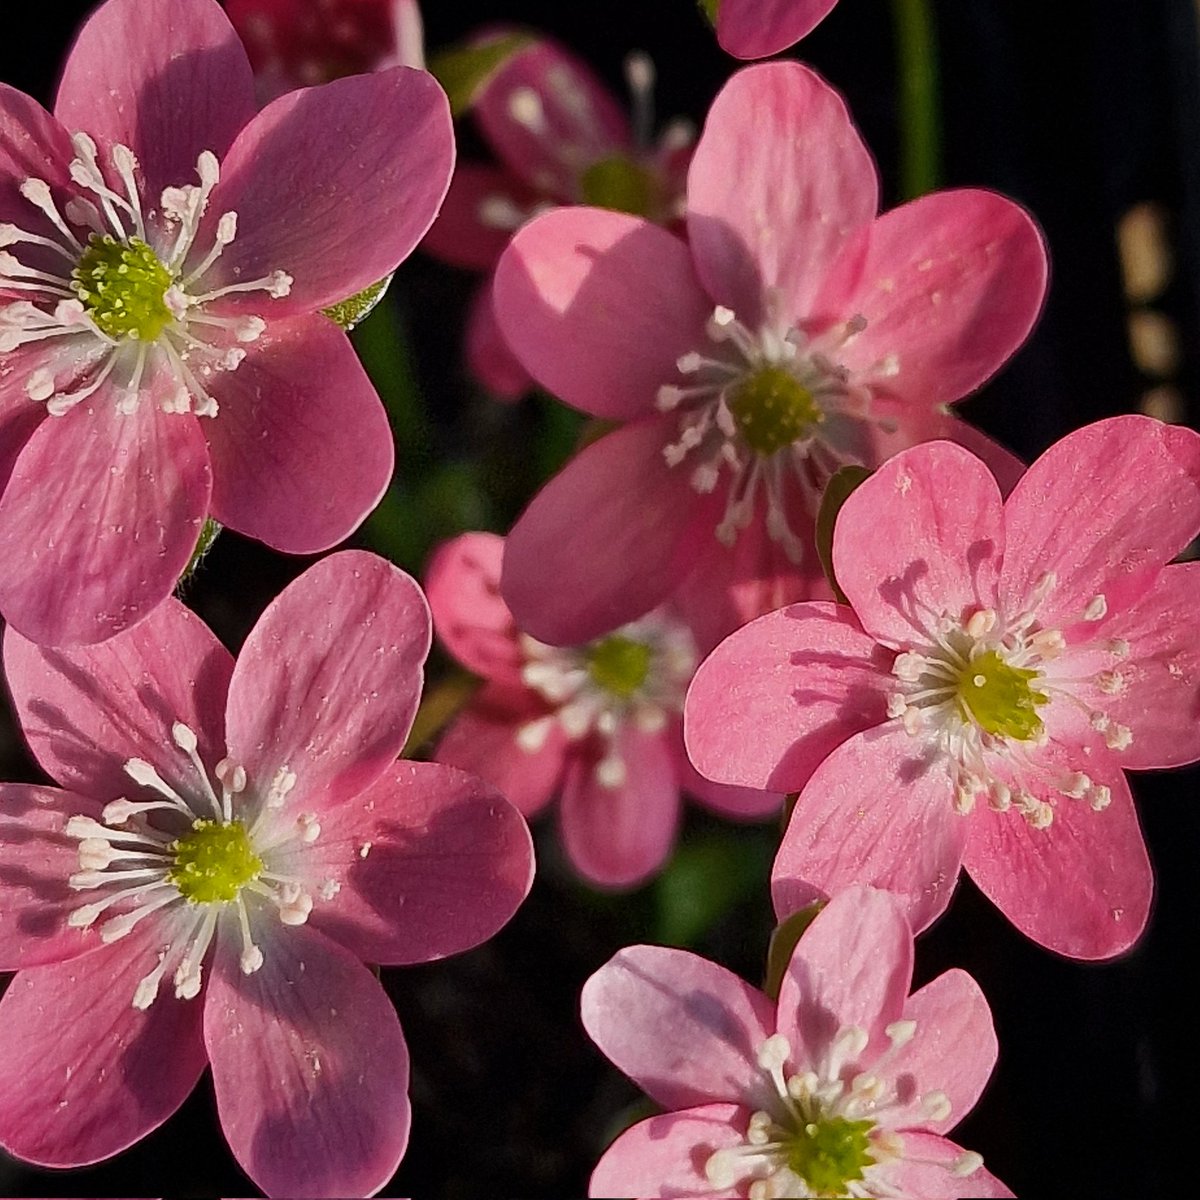 A beautiful Hepatica japonica f. magna flowering now.

This genus of spring woodlanders is sure to make an appearance on the benches at the AGS Show & Plant Fair this Saturday, 18 Feb, at Llanwern High School, Hartridge Farm Road, Newport, NP18 2YE.

Doors open 11am - 3.30pm.